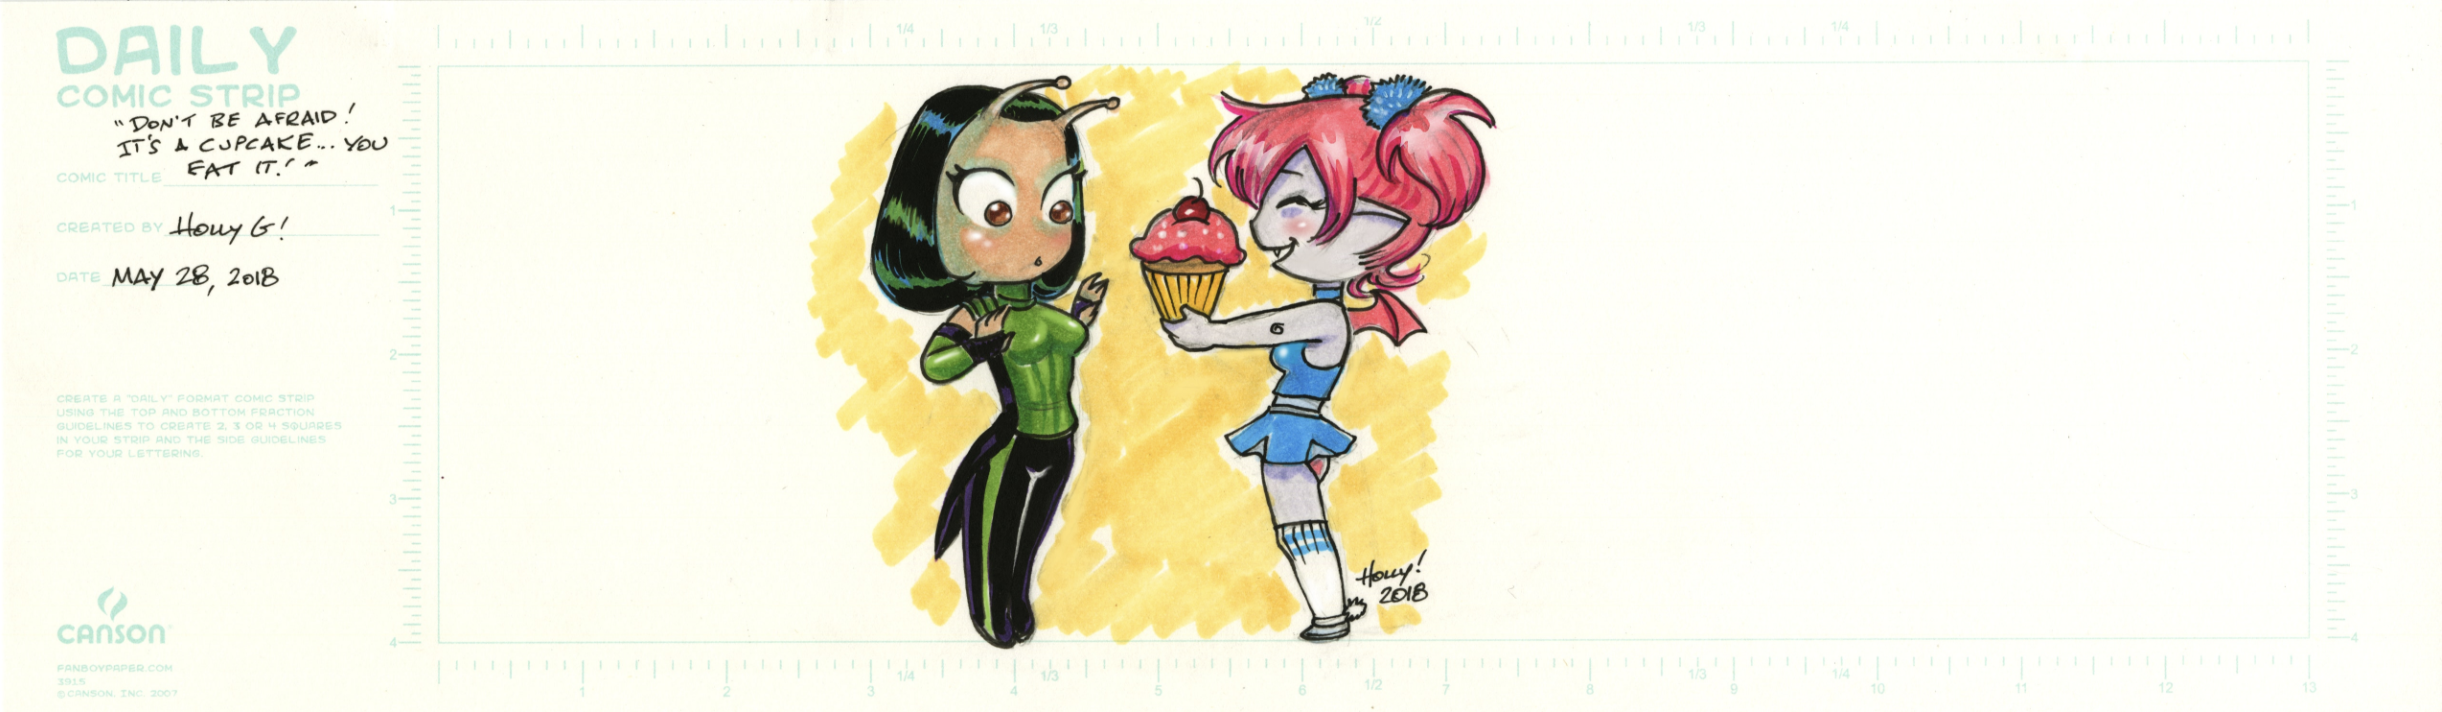 Daily Doodle: Sharing a Cupcake